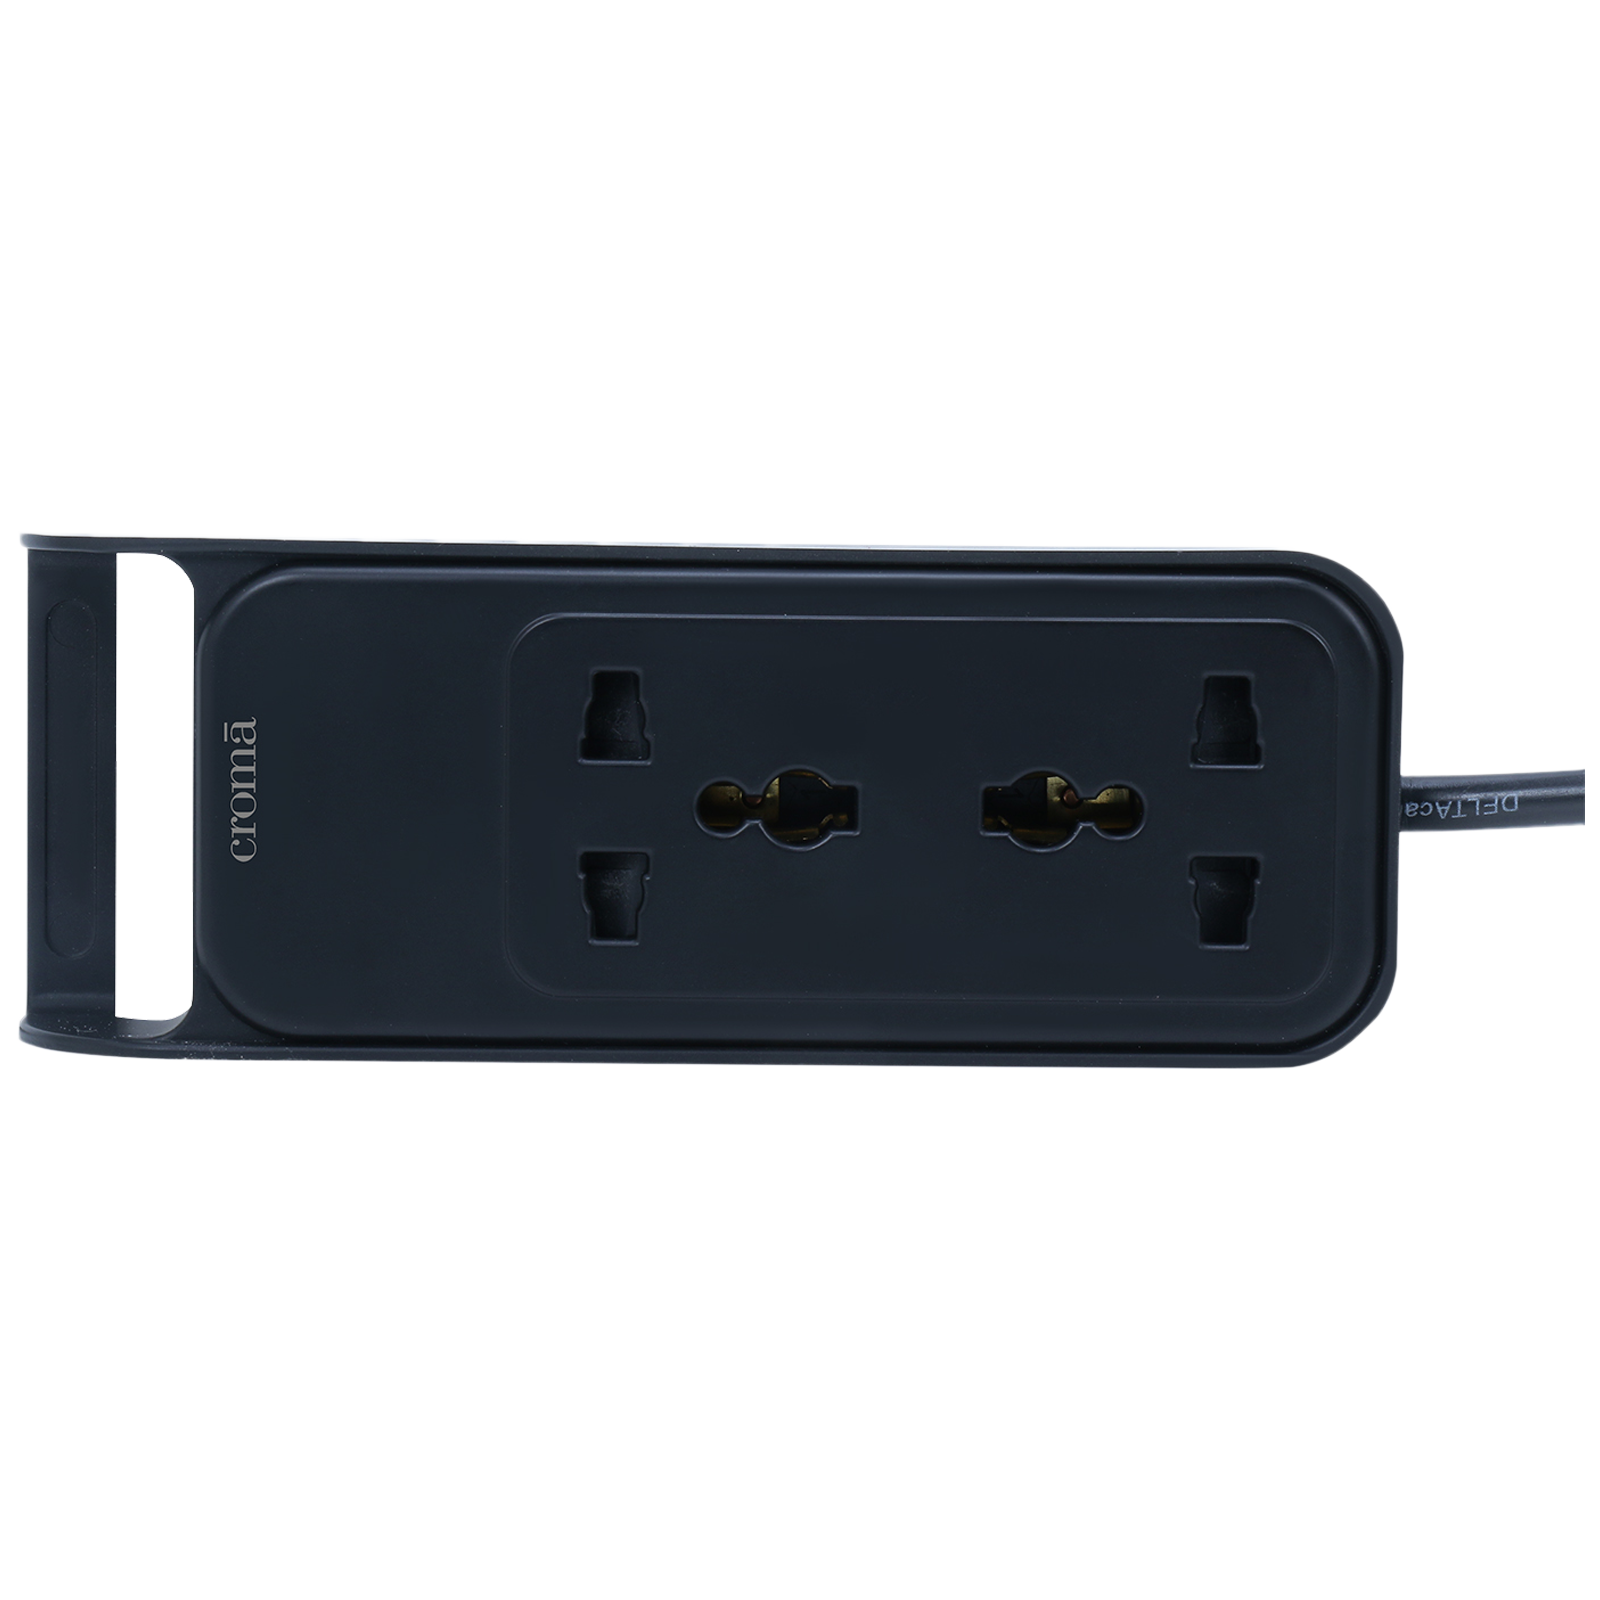 Croma 6 Amps 2 Sockets Surge Protector (0.8 Meters, Safety Shutters in Socket, CRSP2WMSPA264301, Black)_1